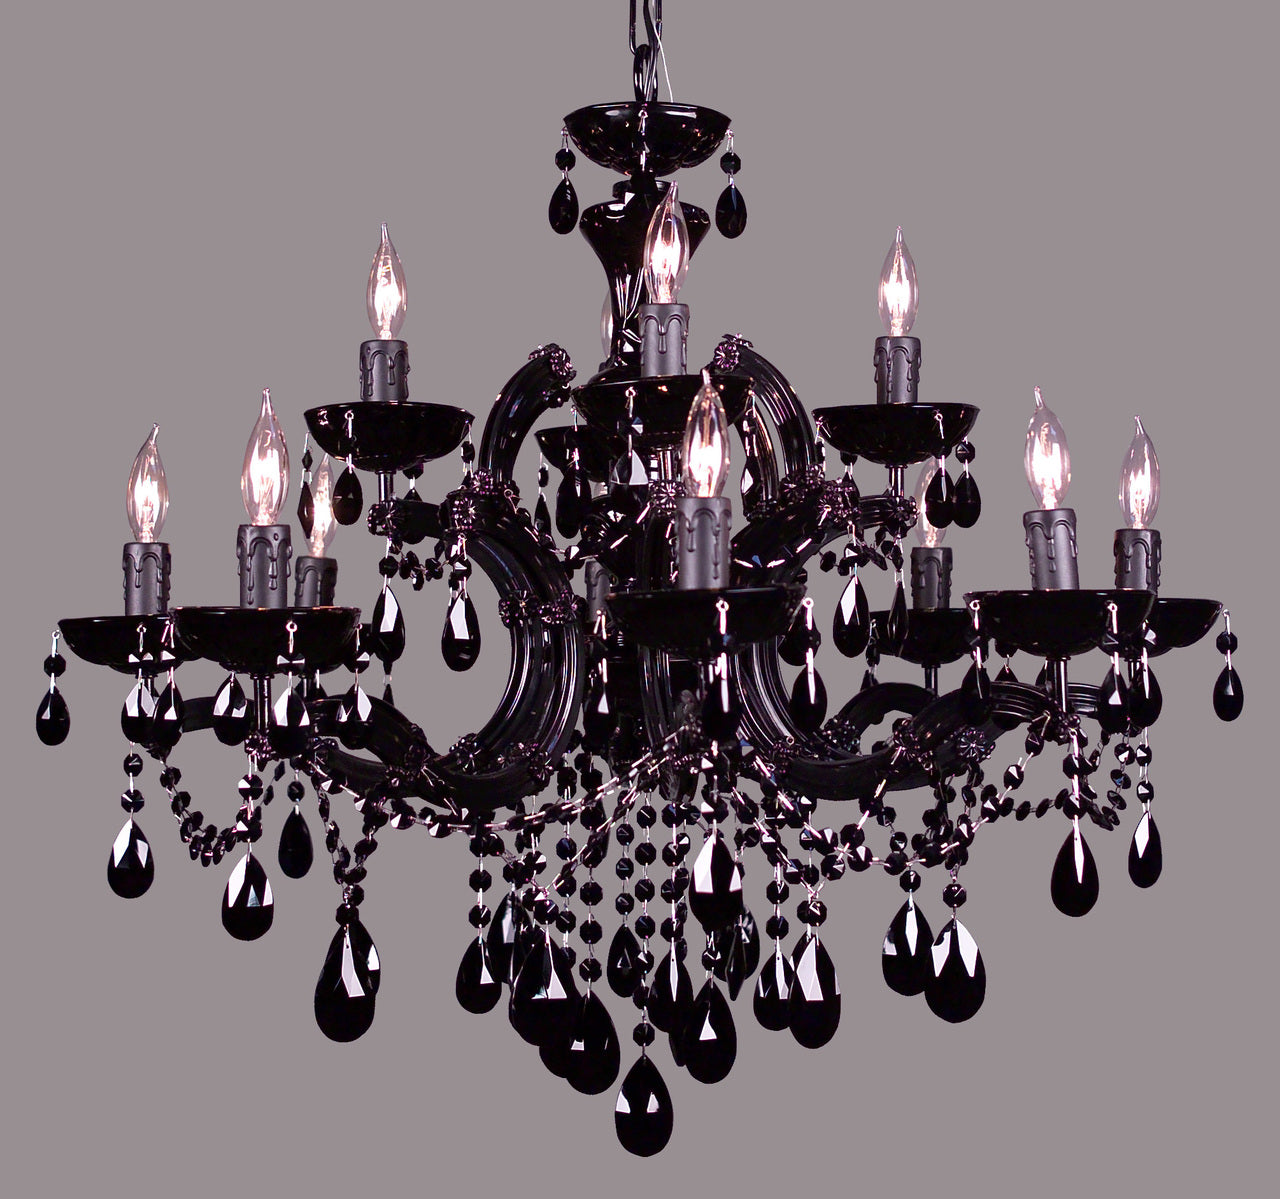 Classic Lighting 8344 BBLK SJT Rialto Traditional Crystal Chandelier in Black